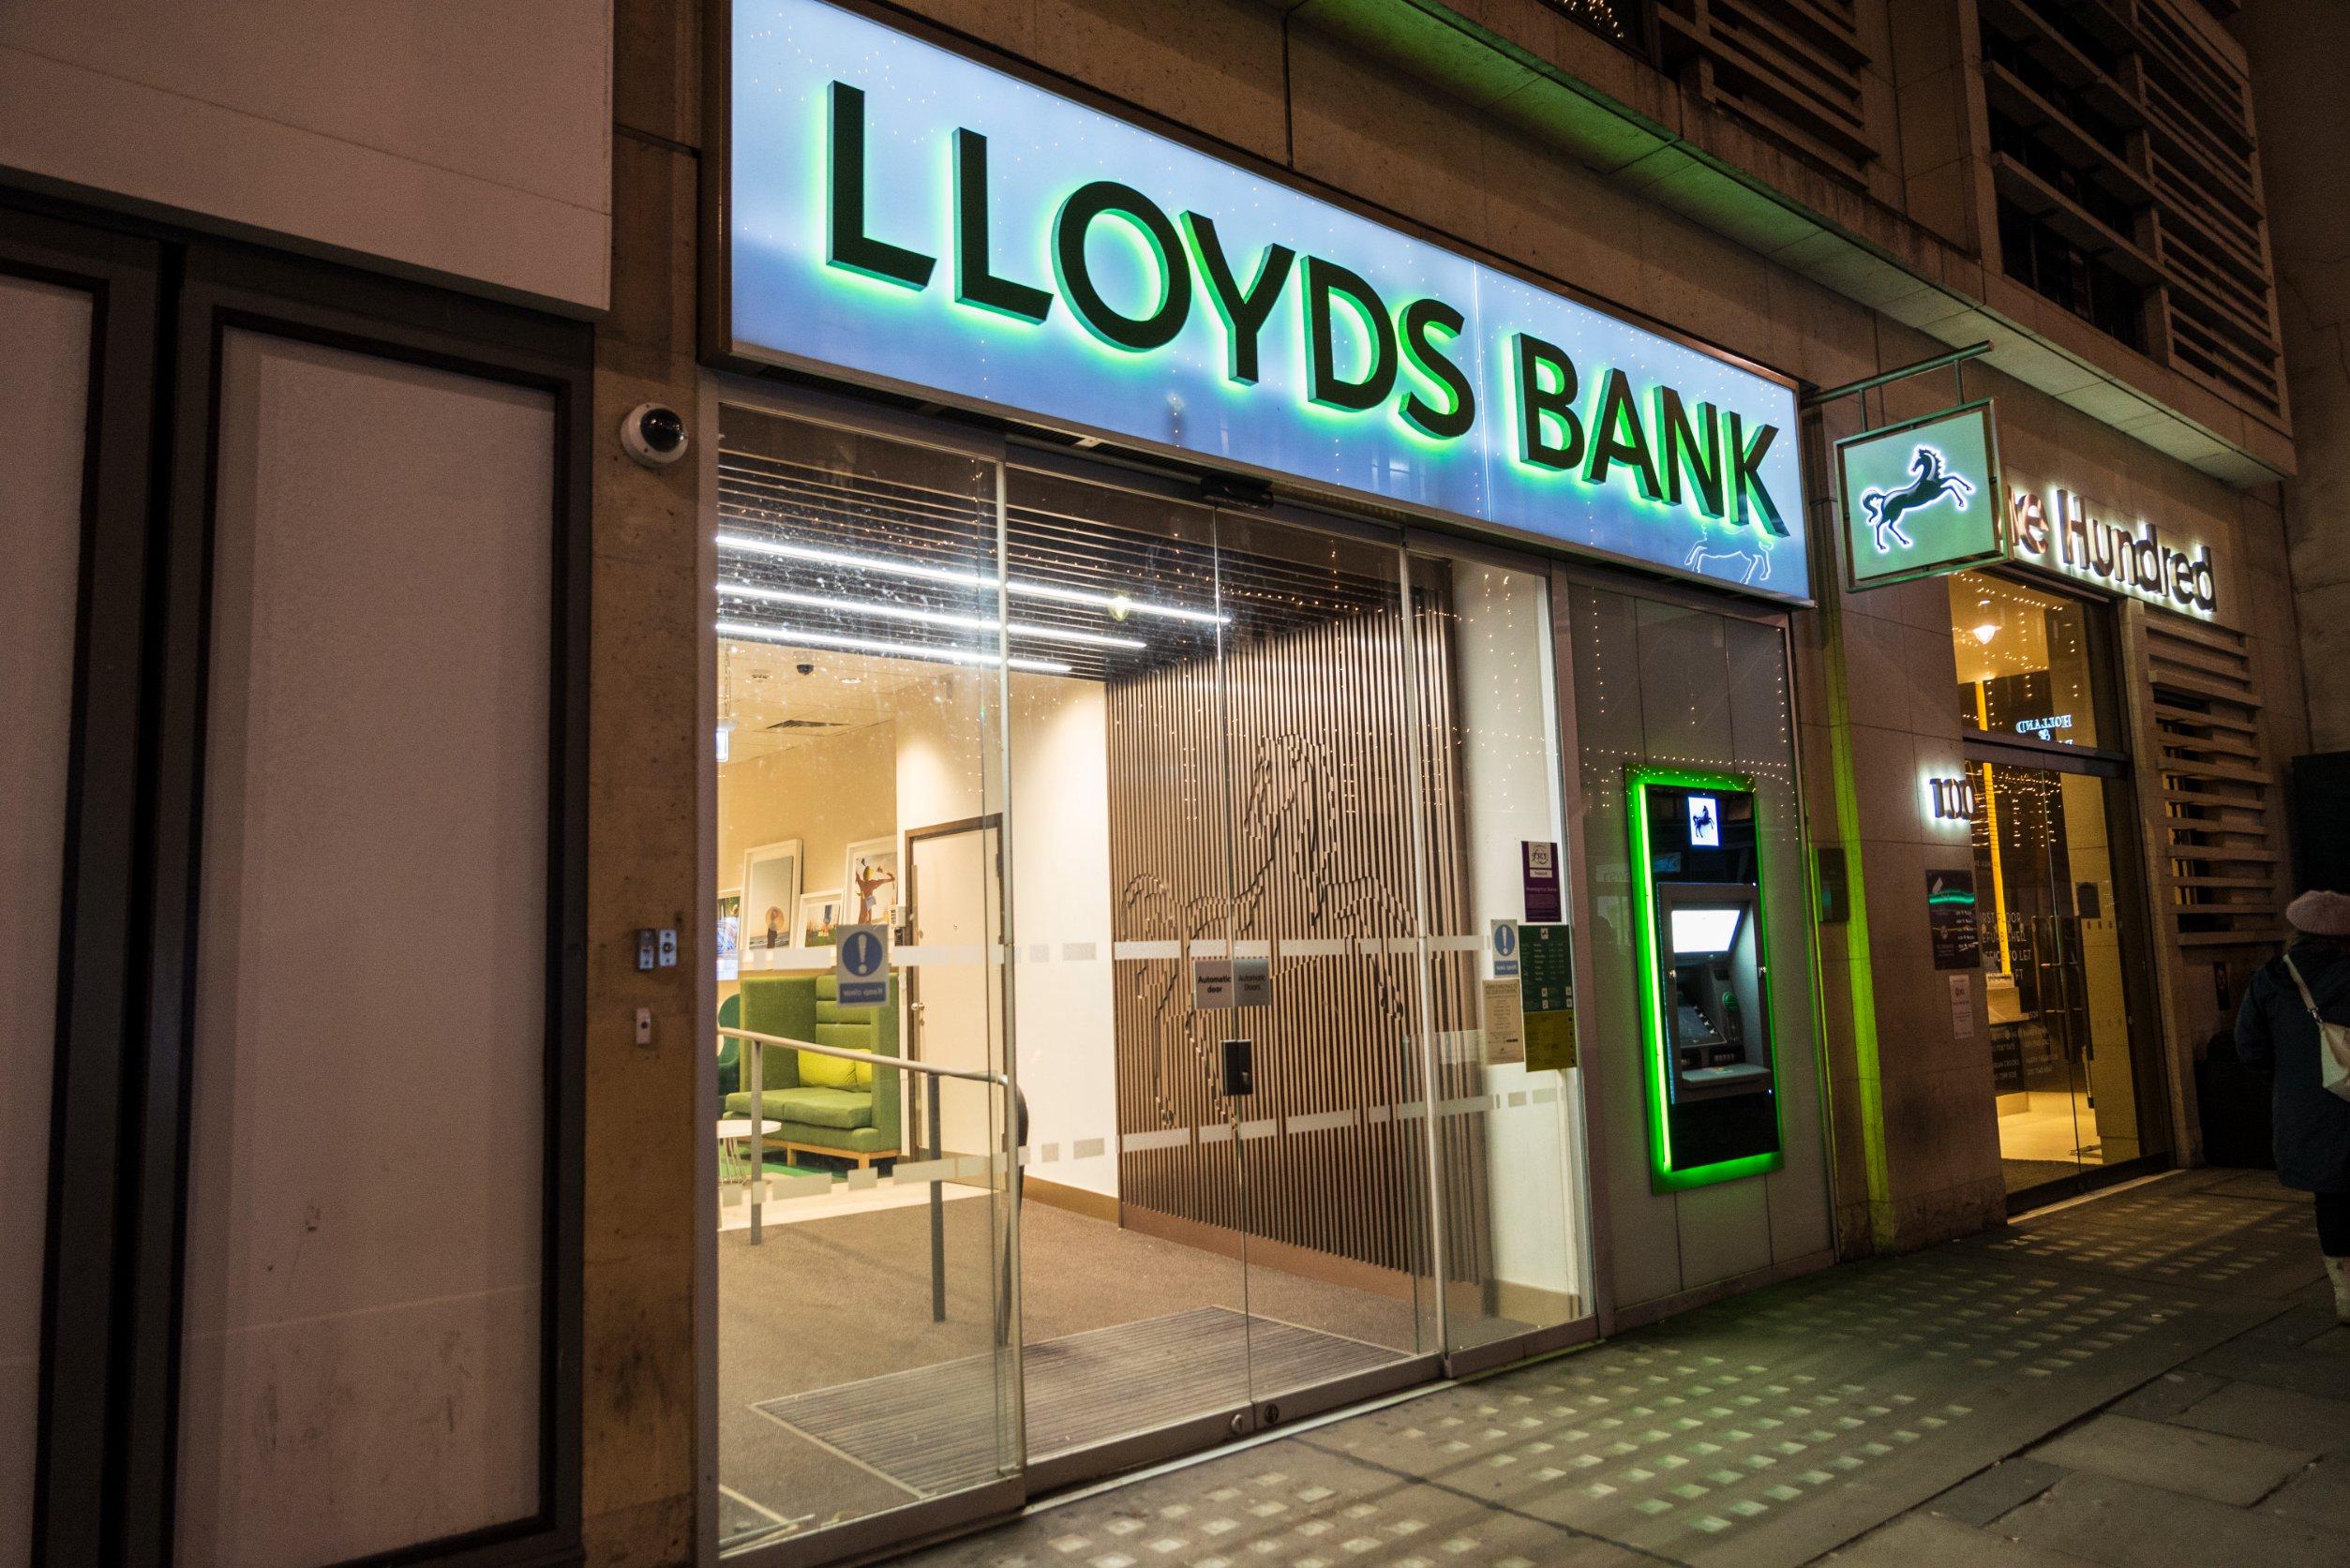 Lloyds Share Price Outlook in the Wake of Hunt’s Hawkish Tone